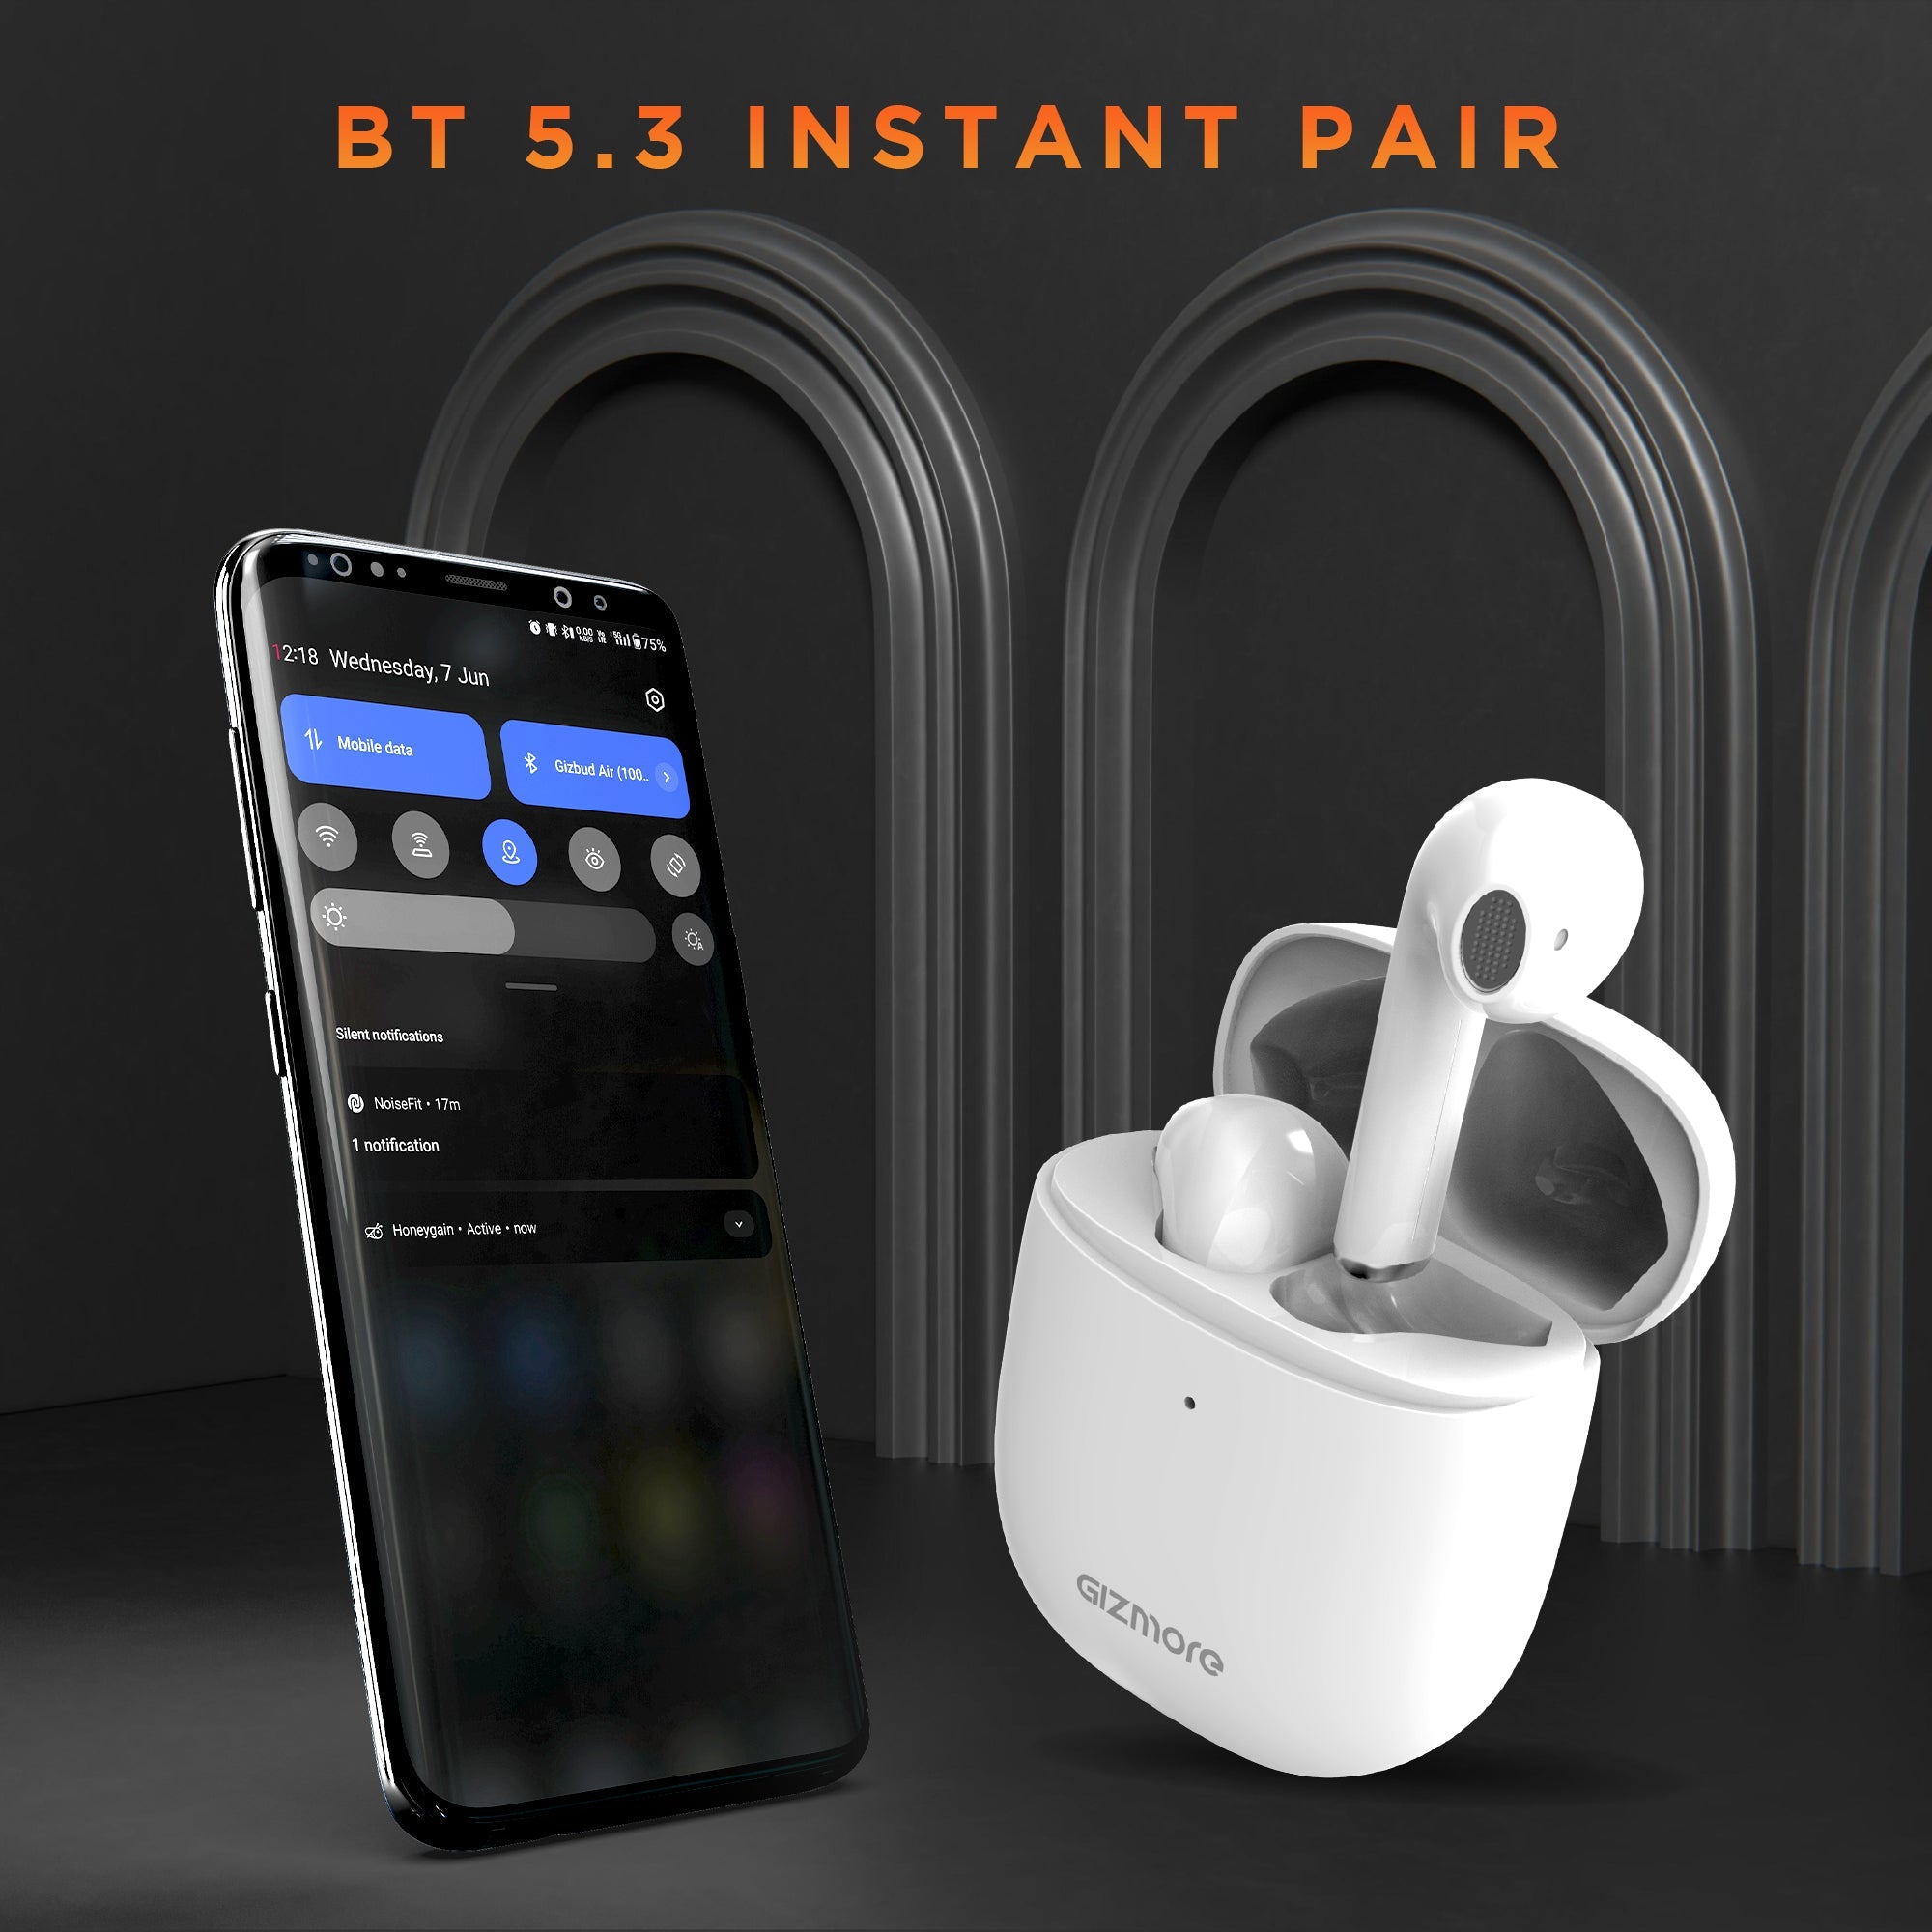 GIZMORE TWS 801 Air Massive Playback Upto 25 Hr, Voice Assistant & Type C Fast Charge Bluetooth Headset